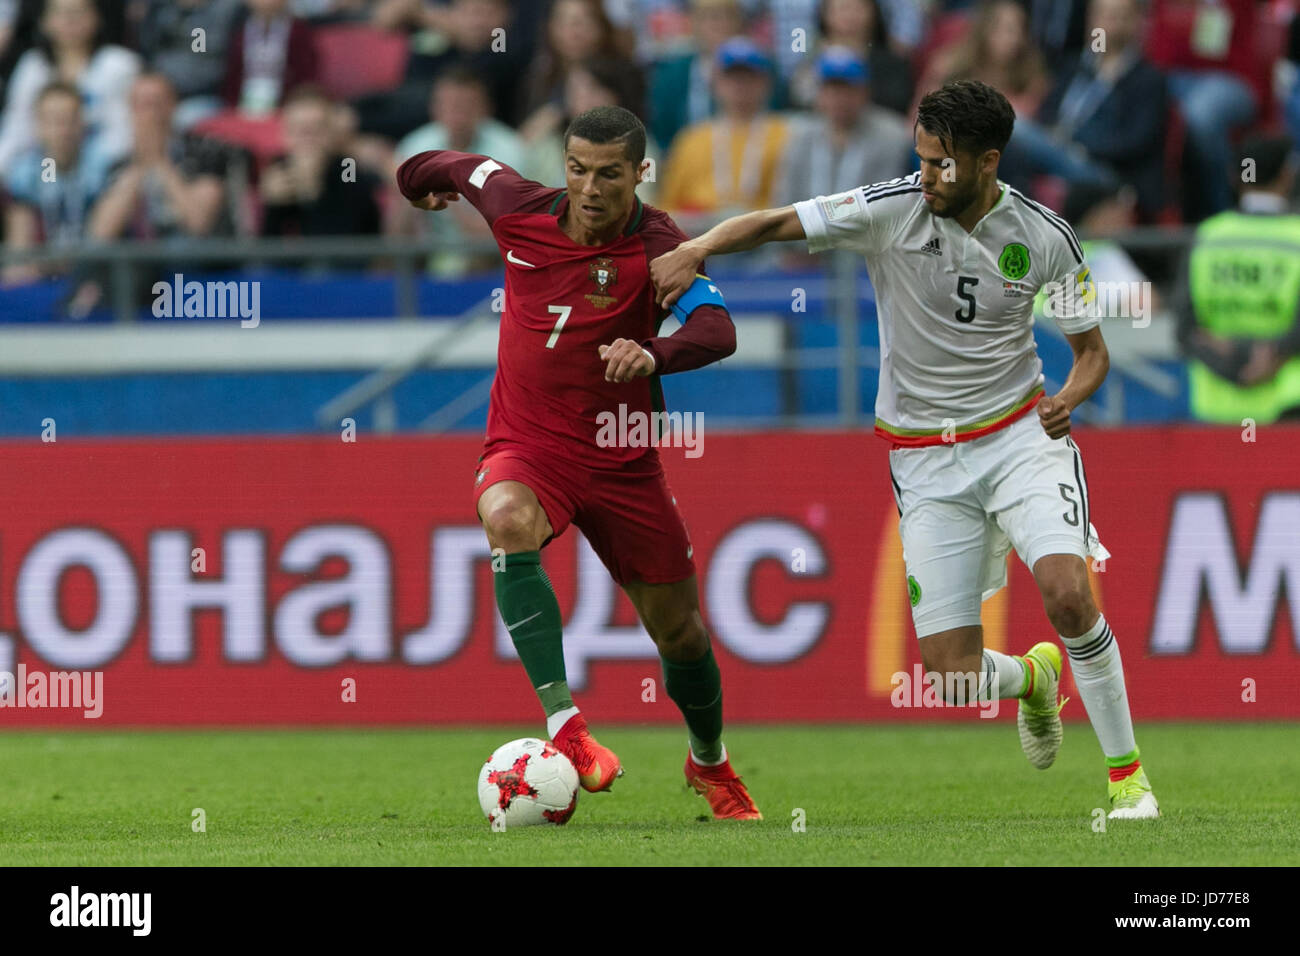 Kazan, Russia. 18th June, 2017. Portugal's Cristiano Ronaldo (L) vies with Mexico's Diego Reyes during the 2017 Confederations Cup Group A football match in Kazan, Russia, on June 18, 2017. Credit: Bai Xueqi/Xinhua/Alamy Live News Stock Photo